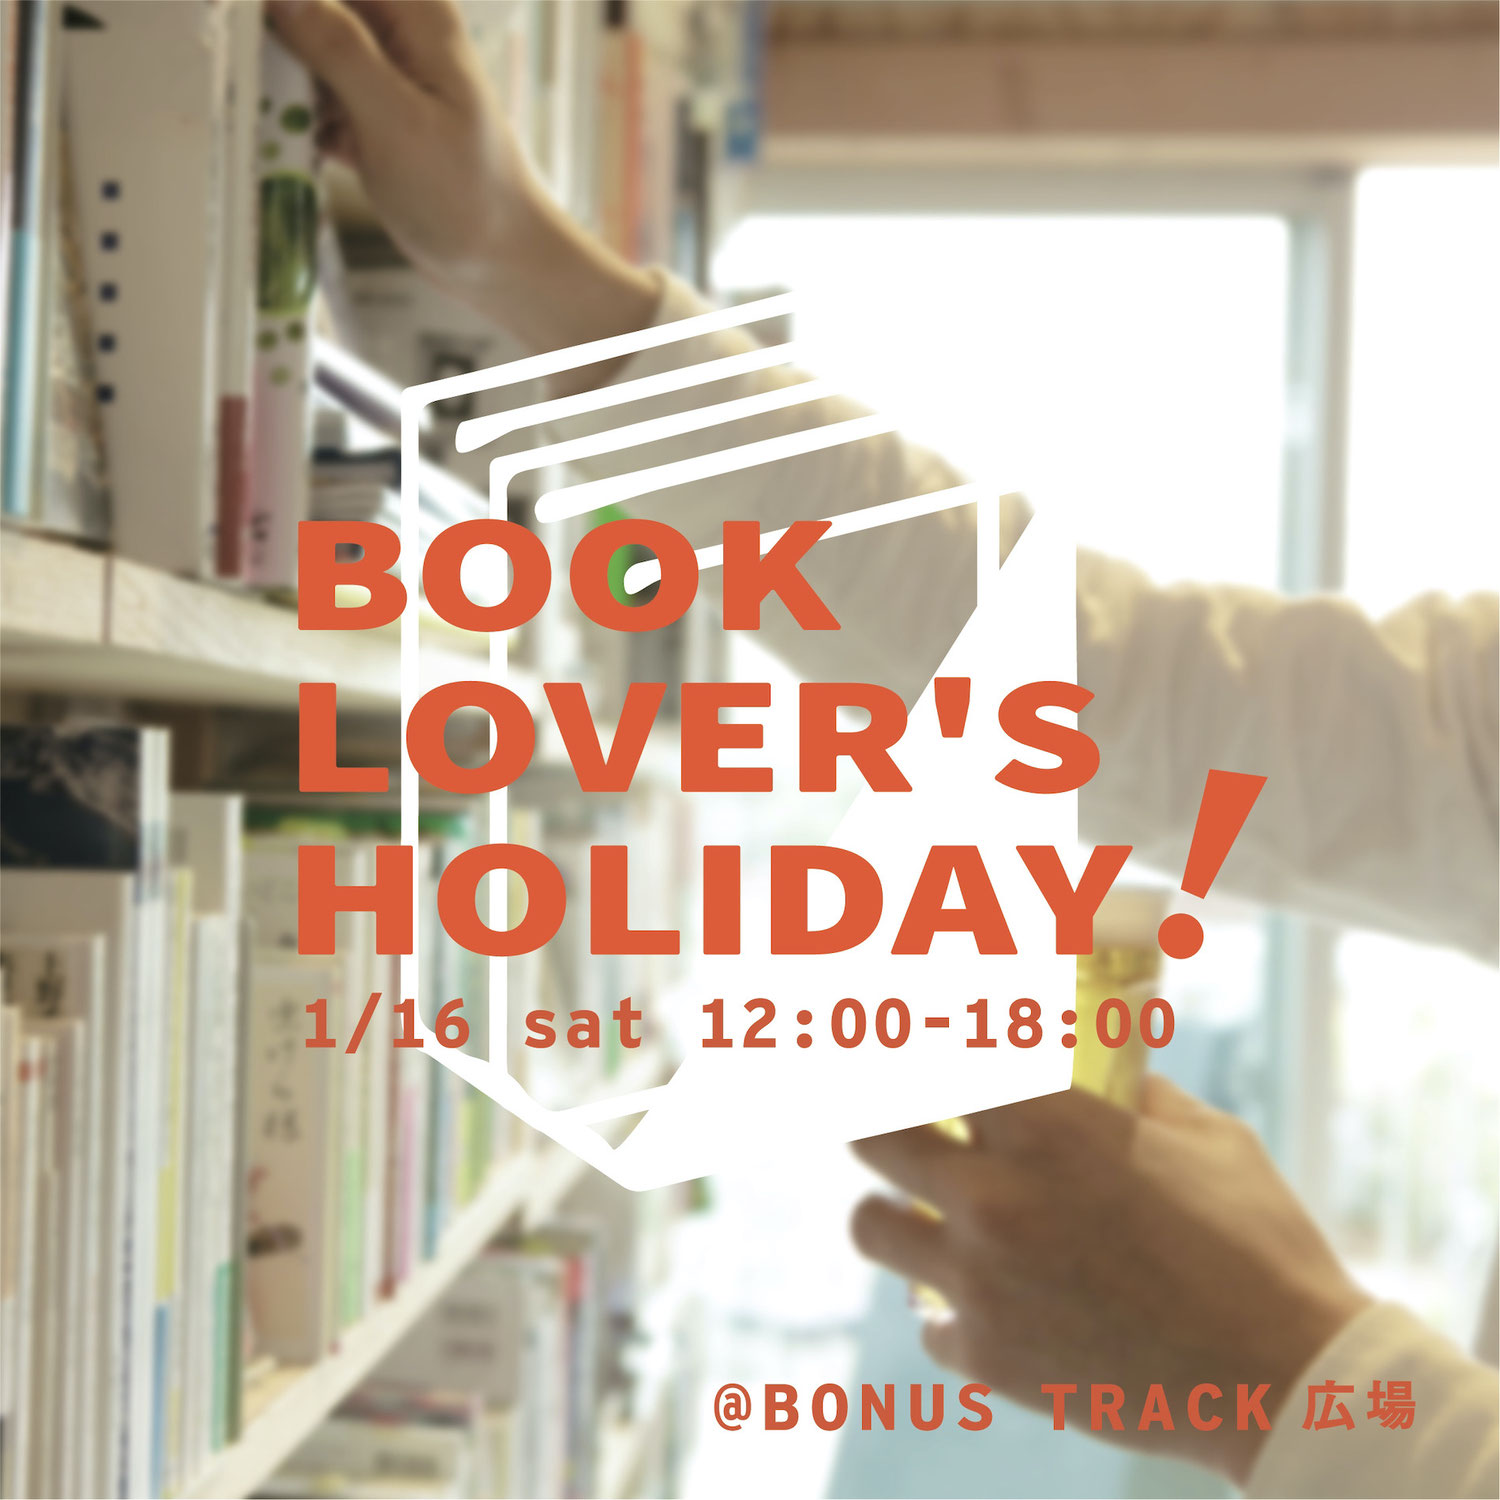 1/16・BOOK LOVER'S HOLIDAYに参加します